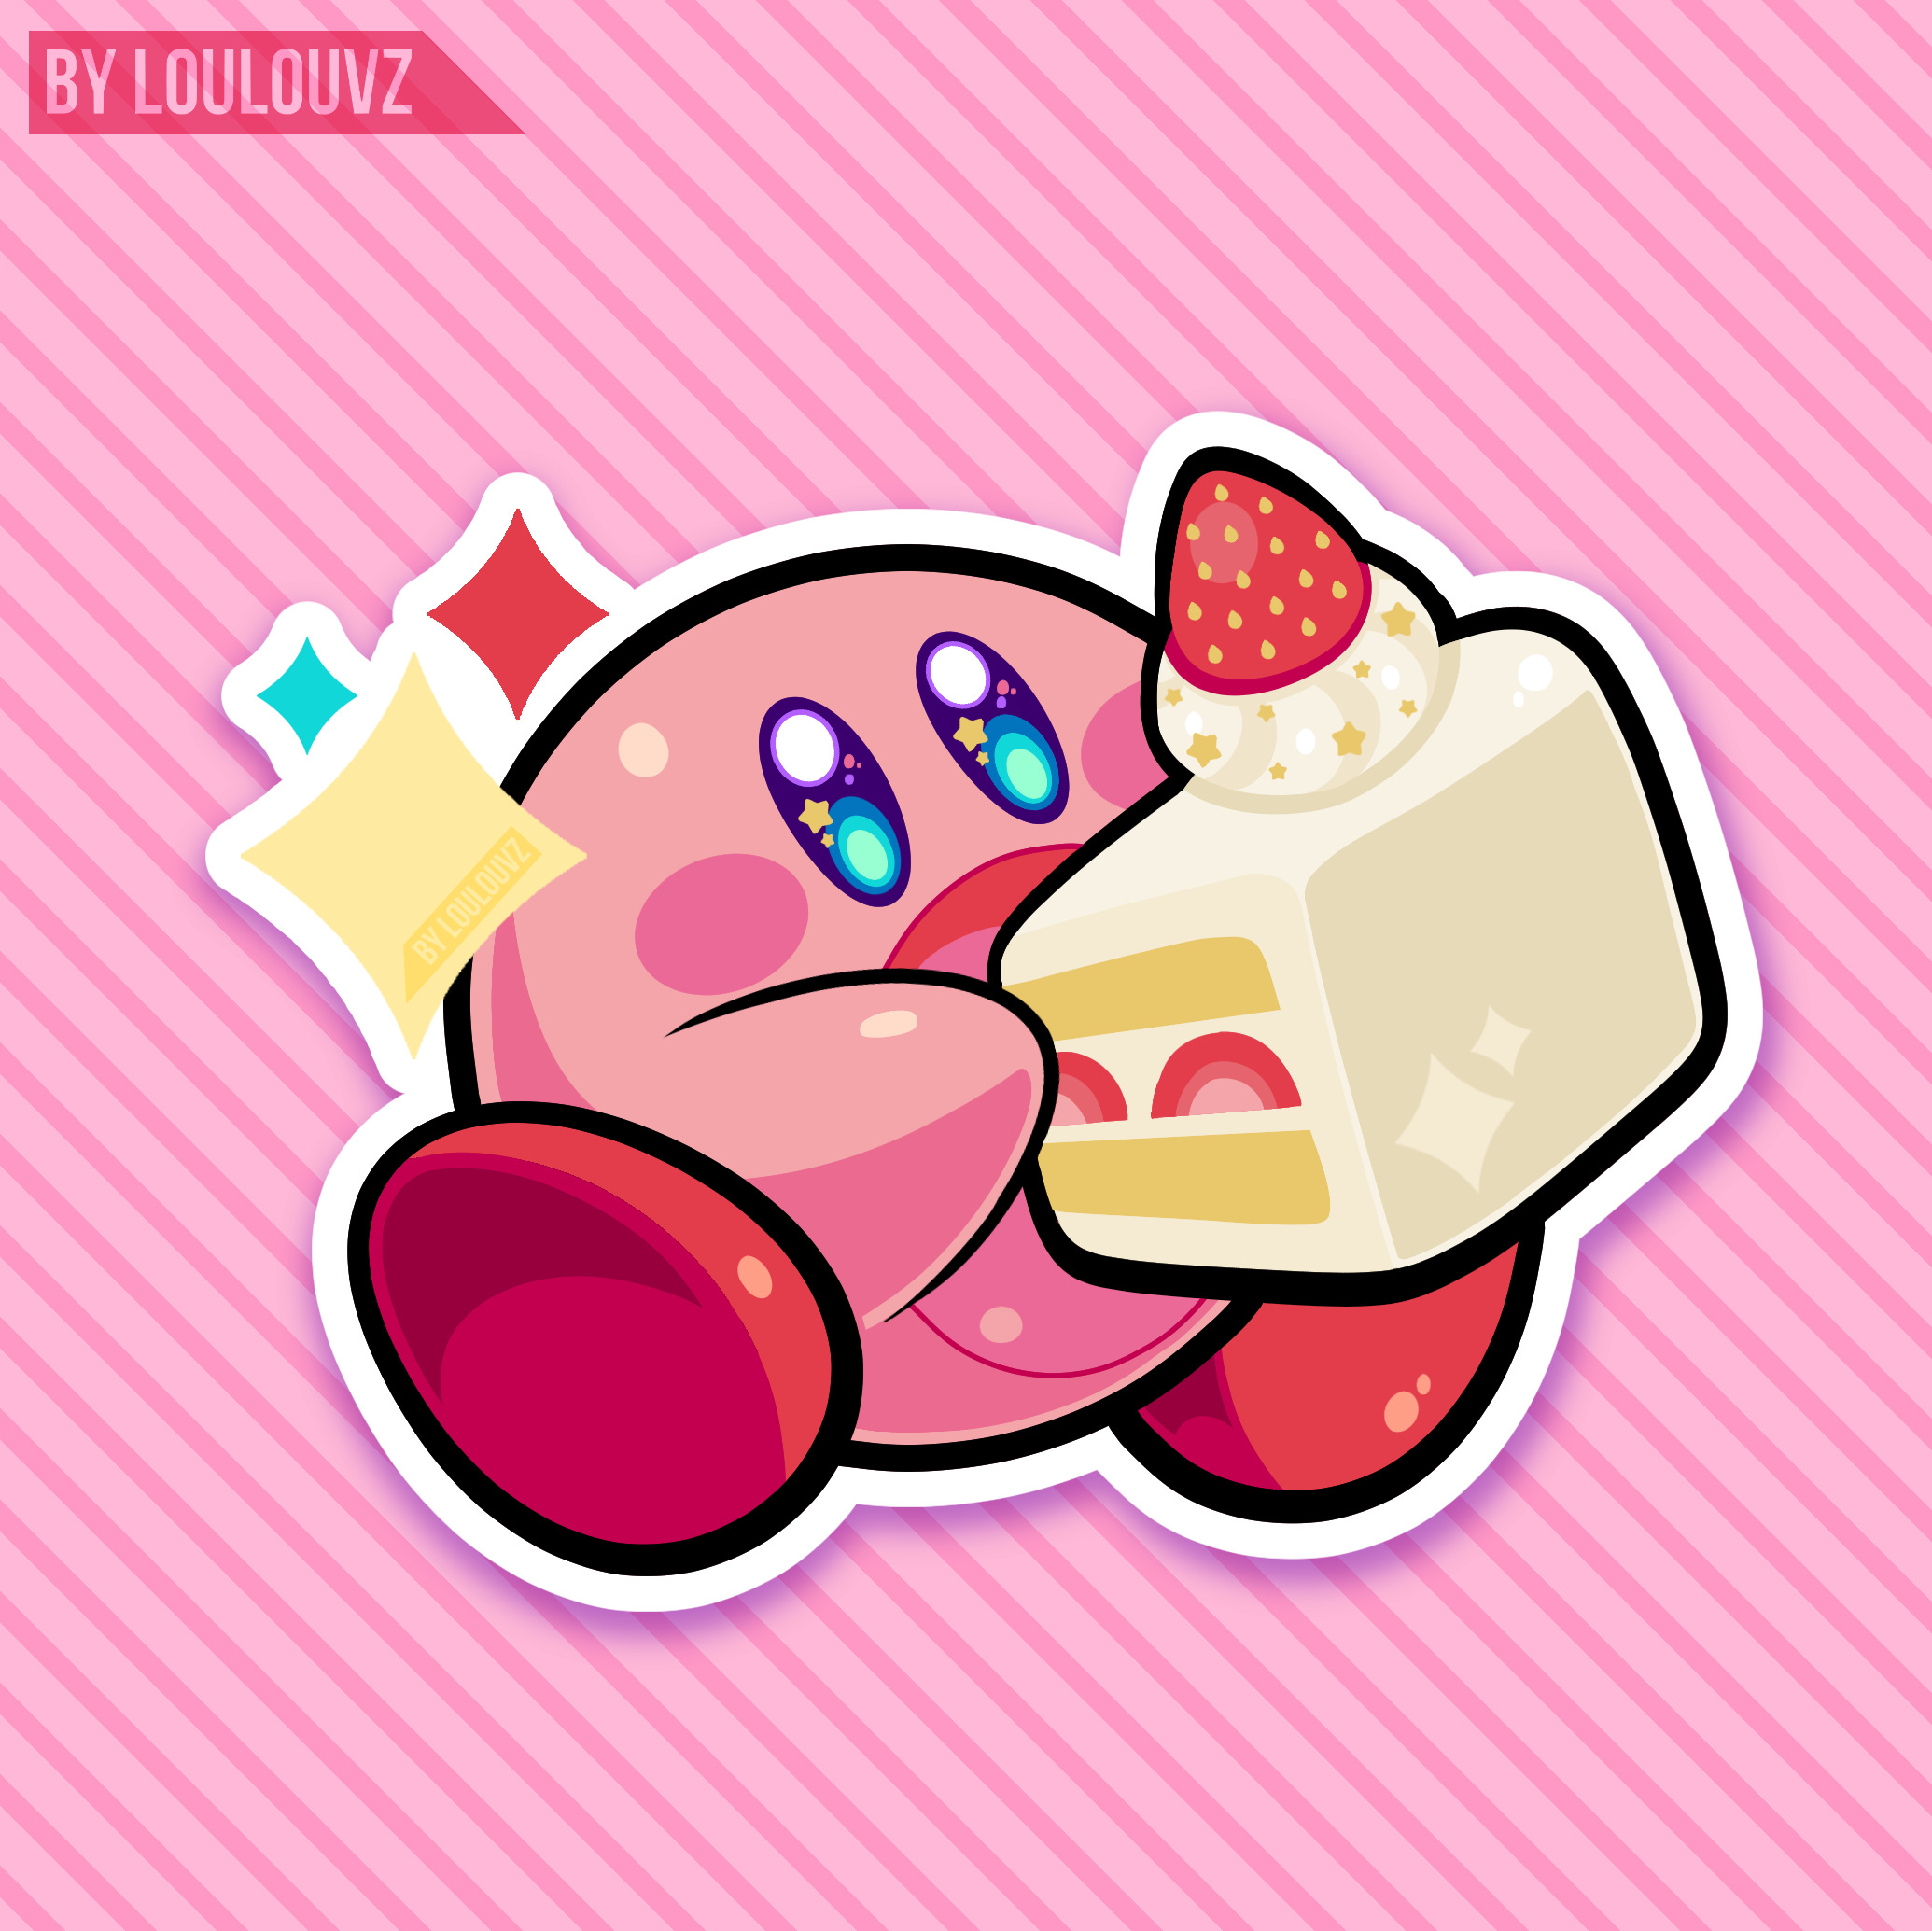 Download Cute Kirby Art Discord Profile Pictures